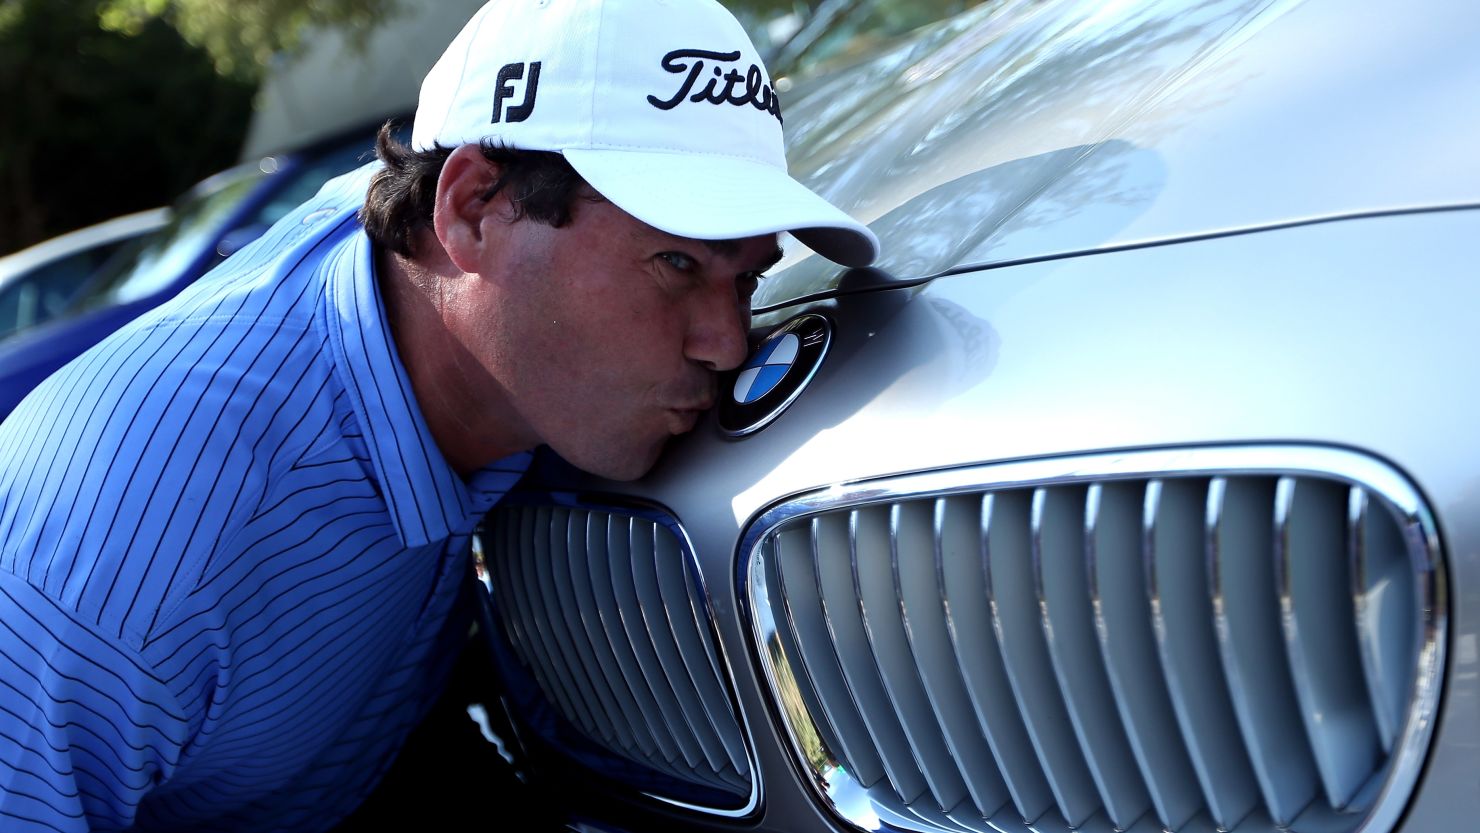 South African golfer Keith Horne was presented with a BMW car after his second hole-in-one on the 12th at Leopard Creek.